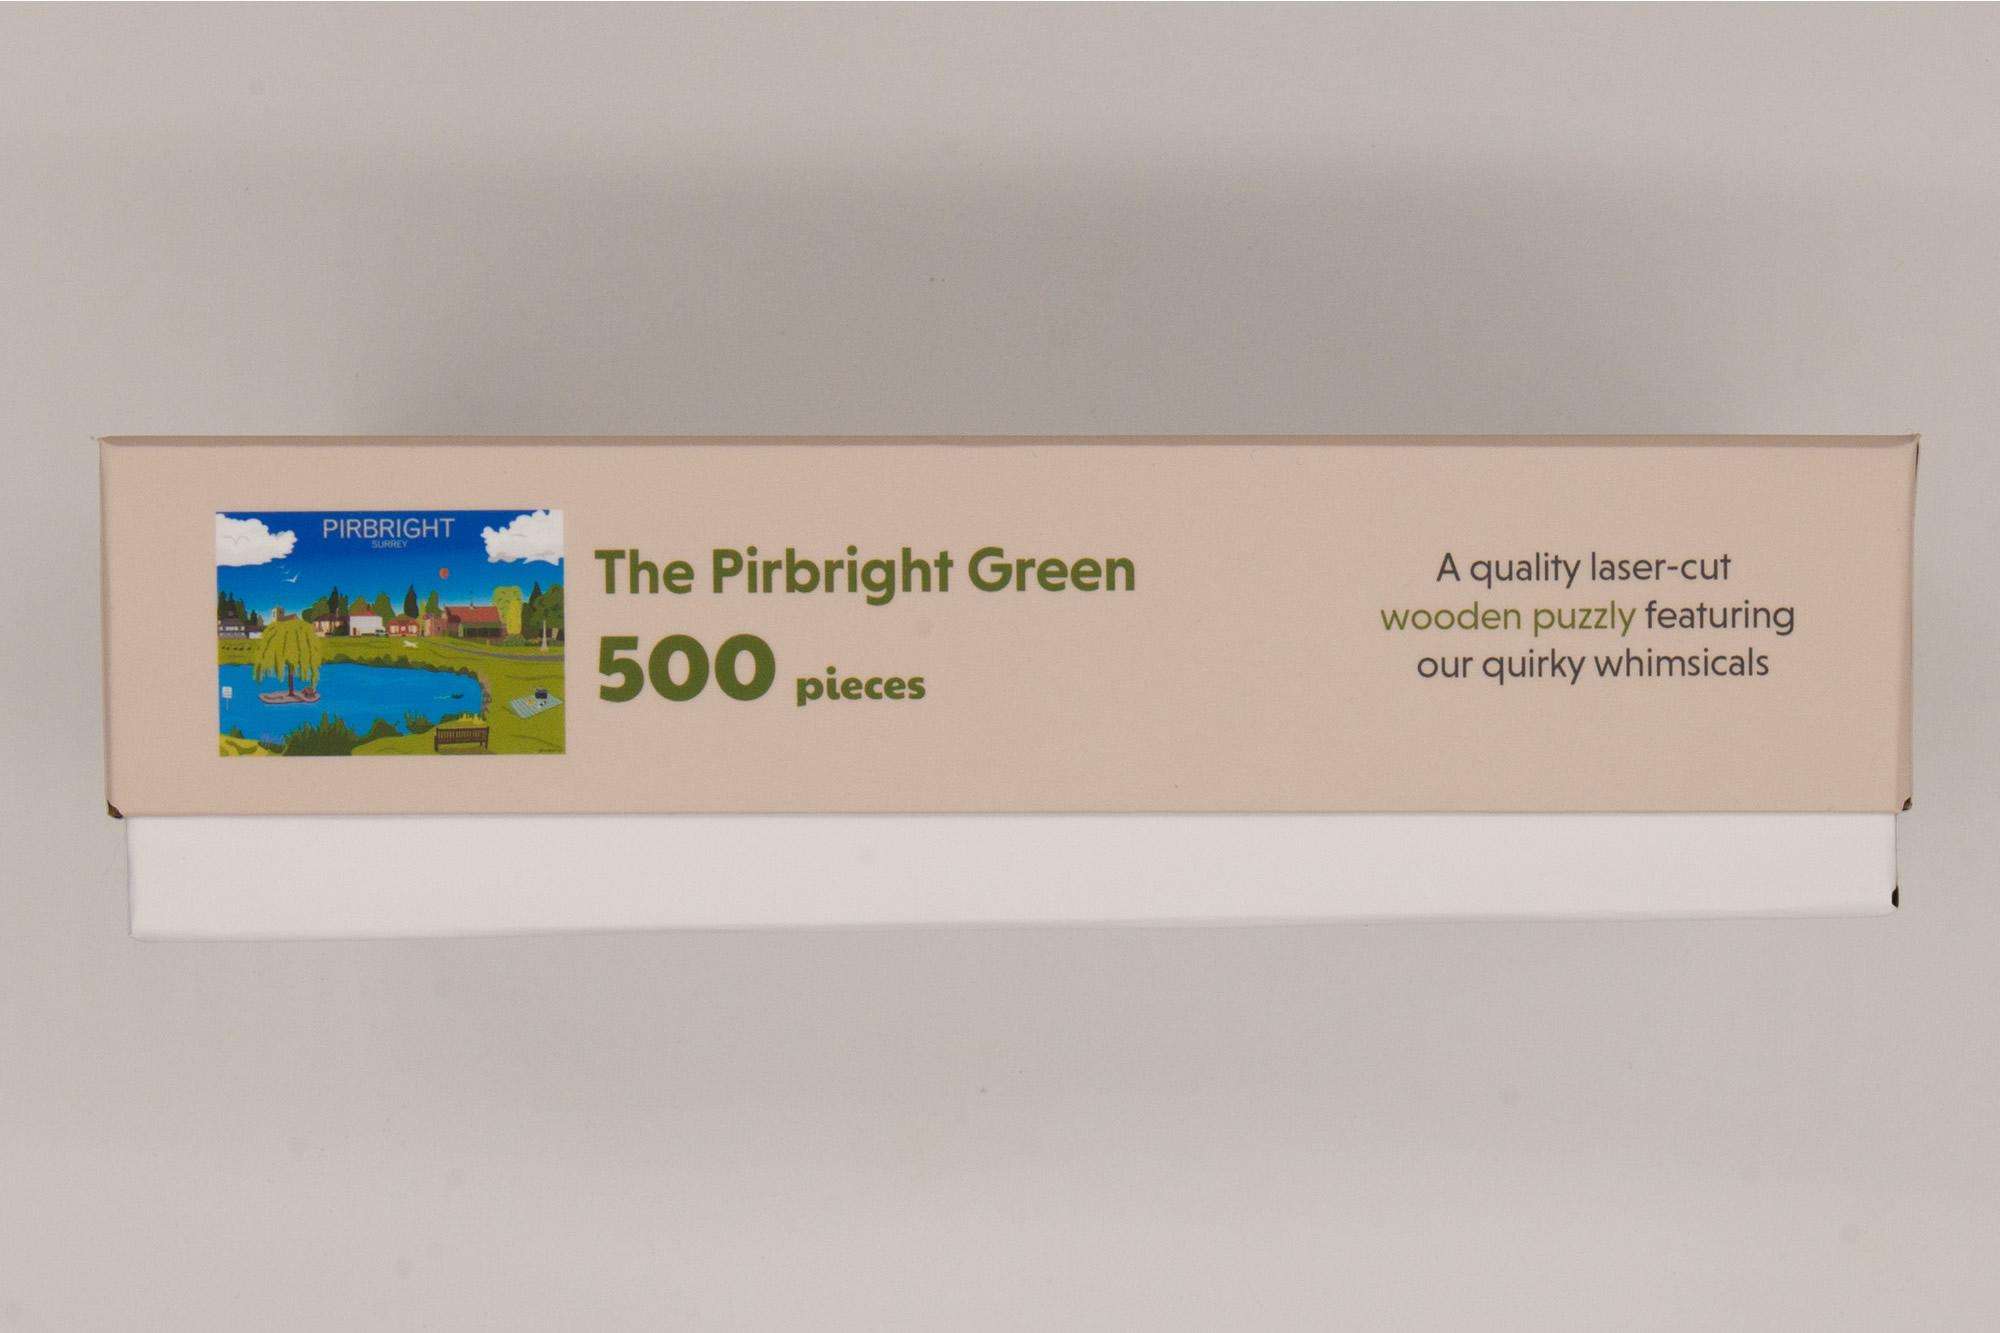 The Pirbright Green quality wooden puzzle